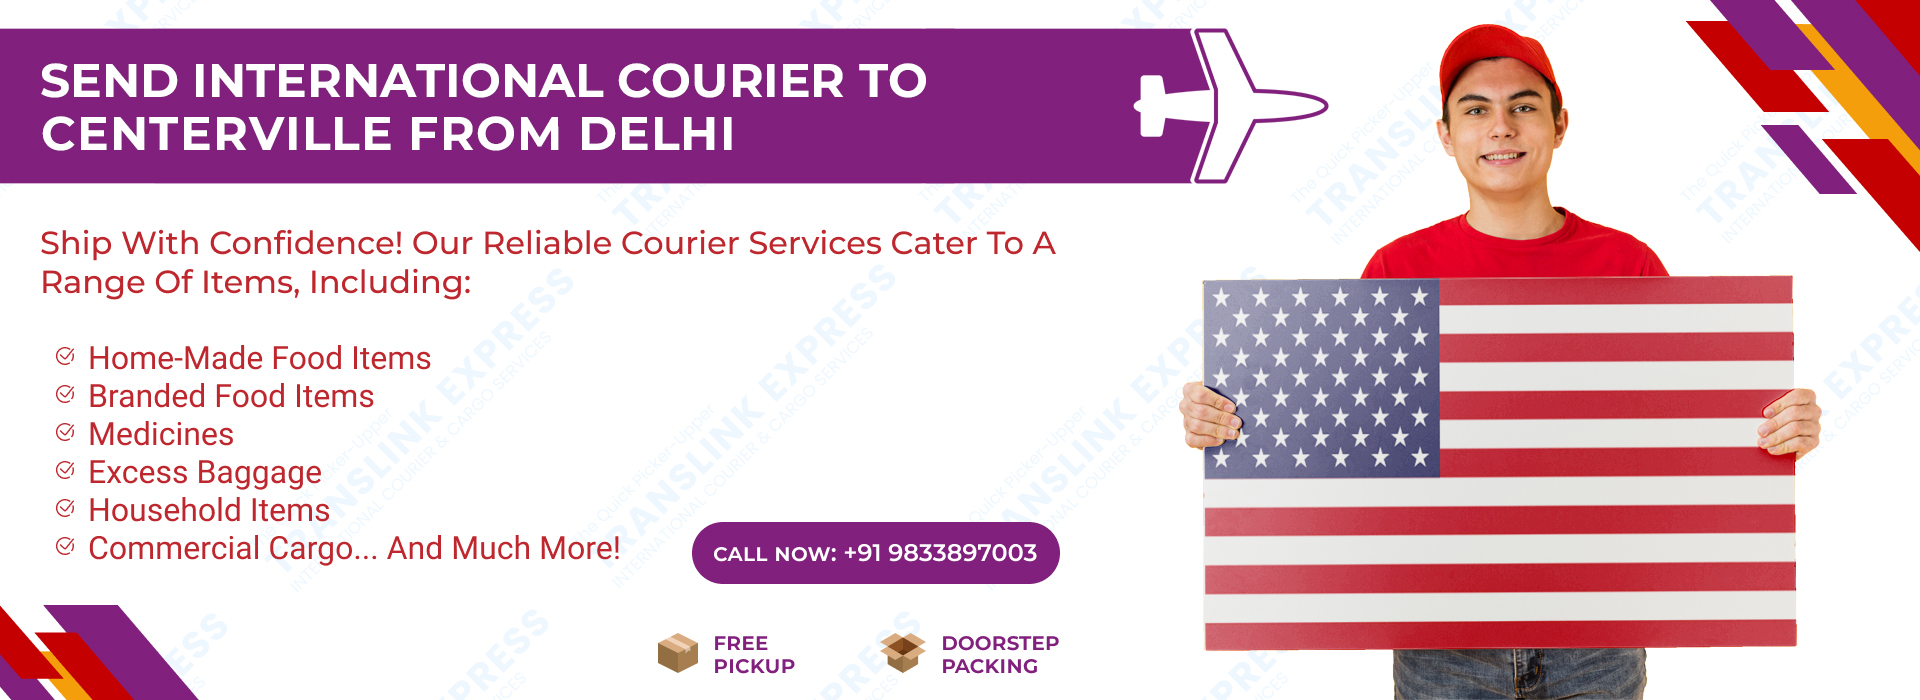 Courier to Centerville From Delhi